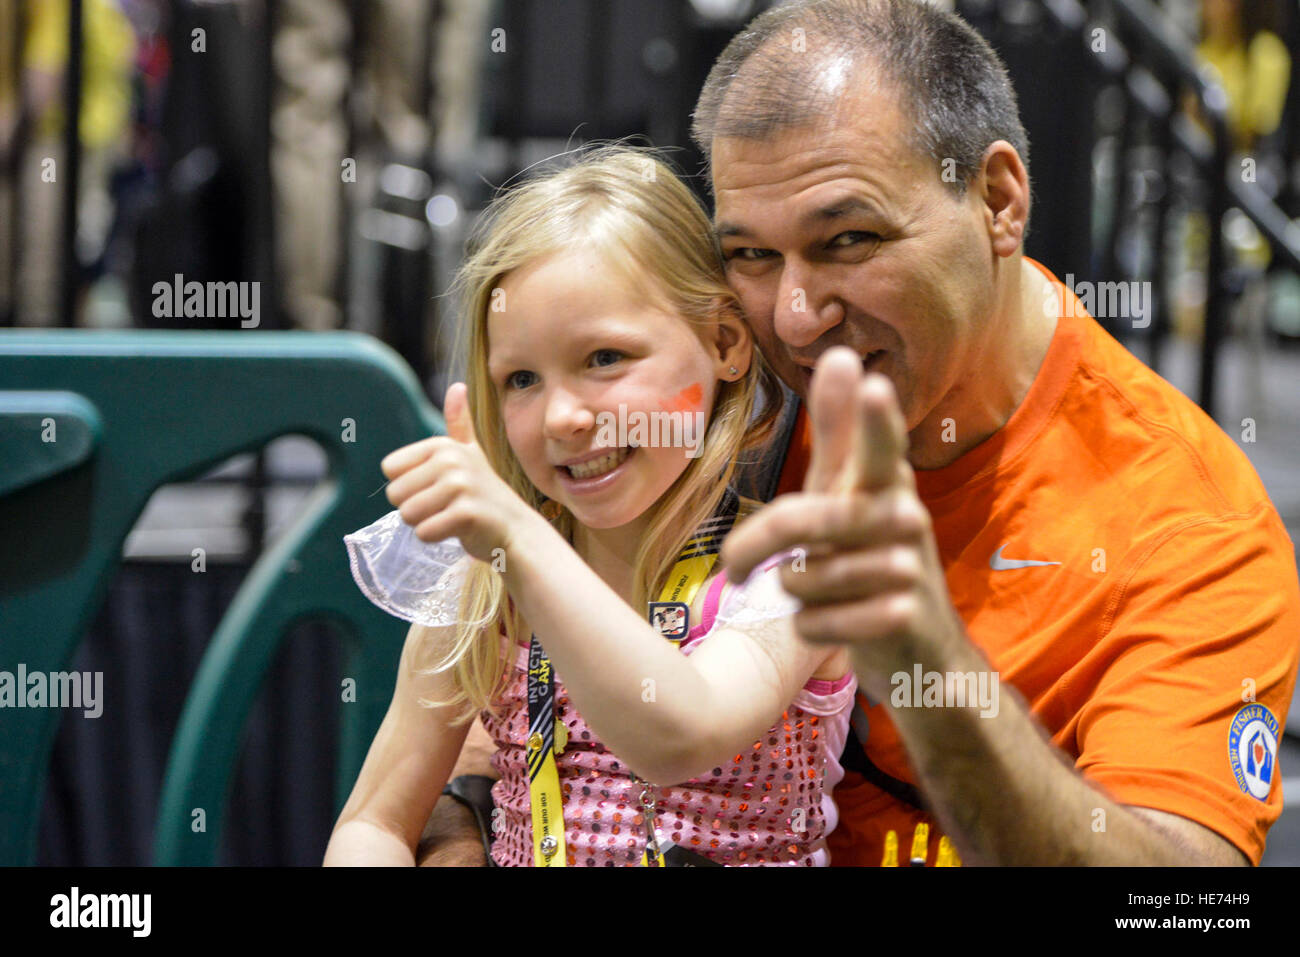 160508-F-WU507-005: Team Netherlands Army wounded warrior athlete Paul Gommers and his daughter, Daimy, pose for the Team Netherlands archery coach, prior to Gommers competing in the archery competition at the ESPN Wide World of Sports complex at Walt Disney World, Orlando, Fla., May 8, 2016.  A total of three medals will be awarded in the event.  Senior Master Sgt. Kevin Wallace/) Stock Photo